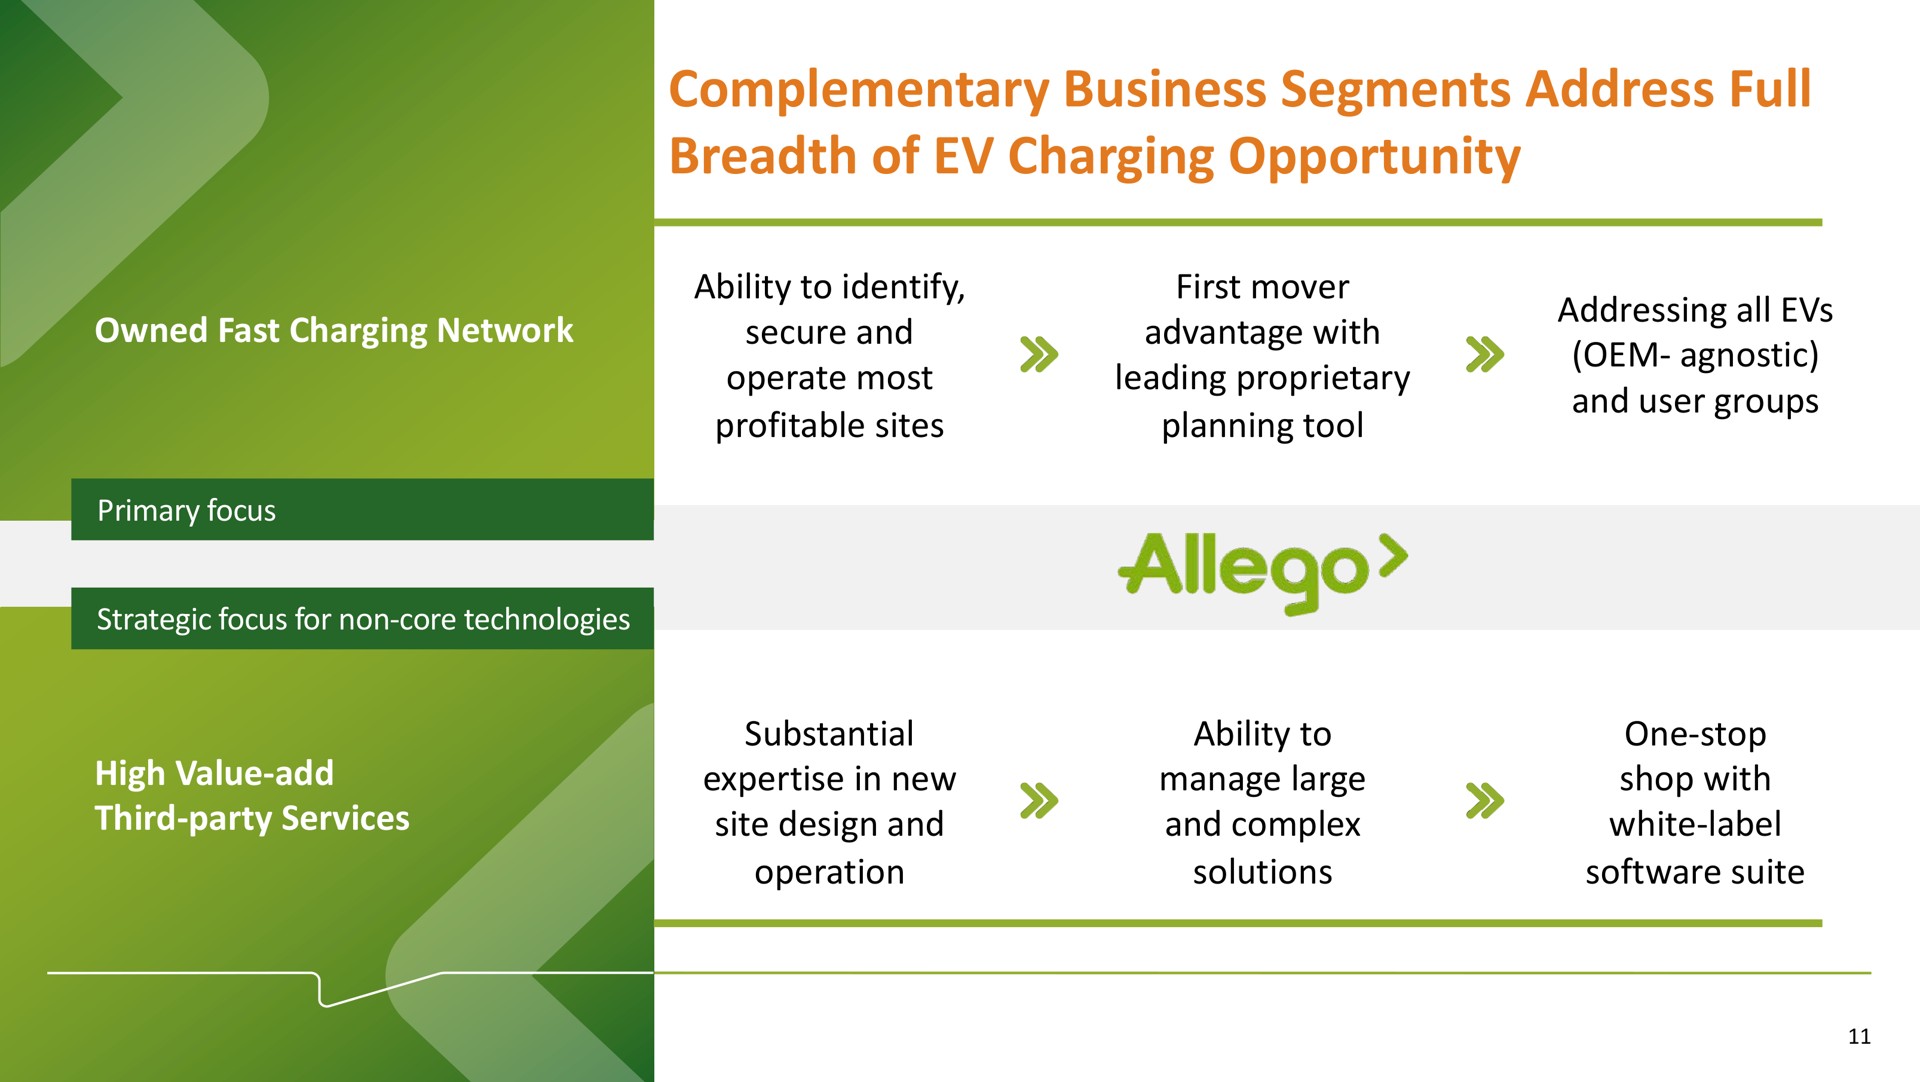 complementary business segments address full breadth of charging opportunity | Allego